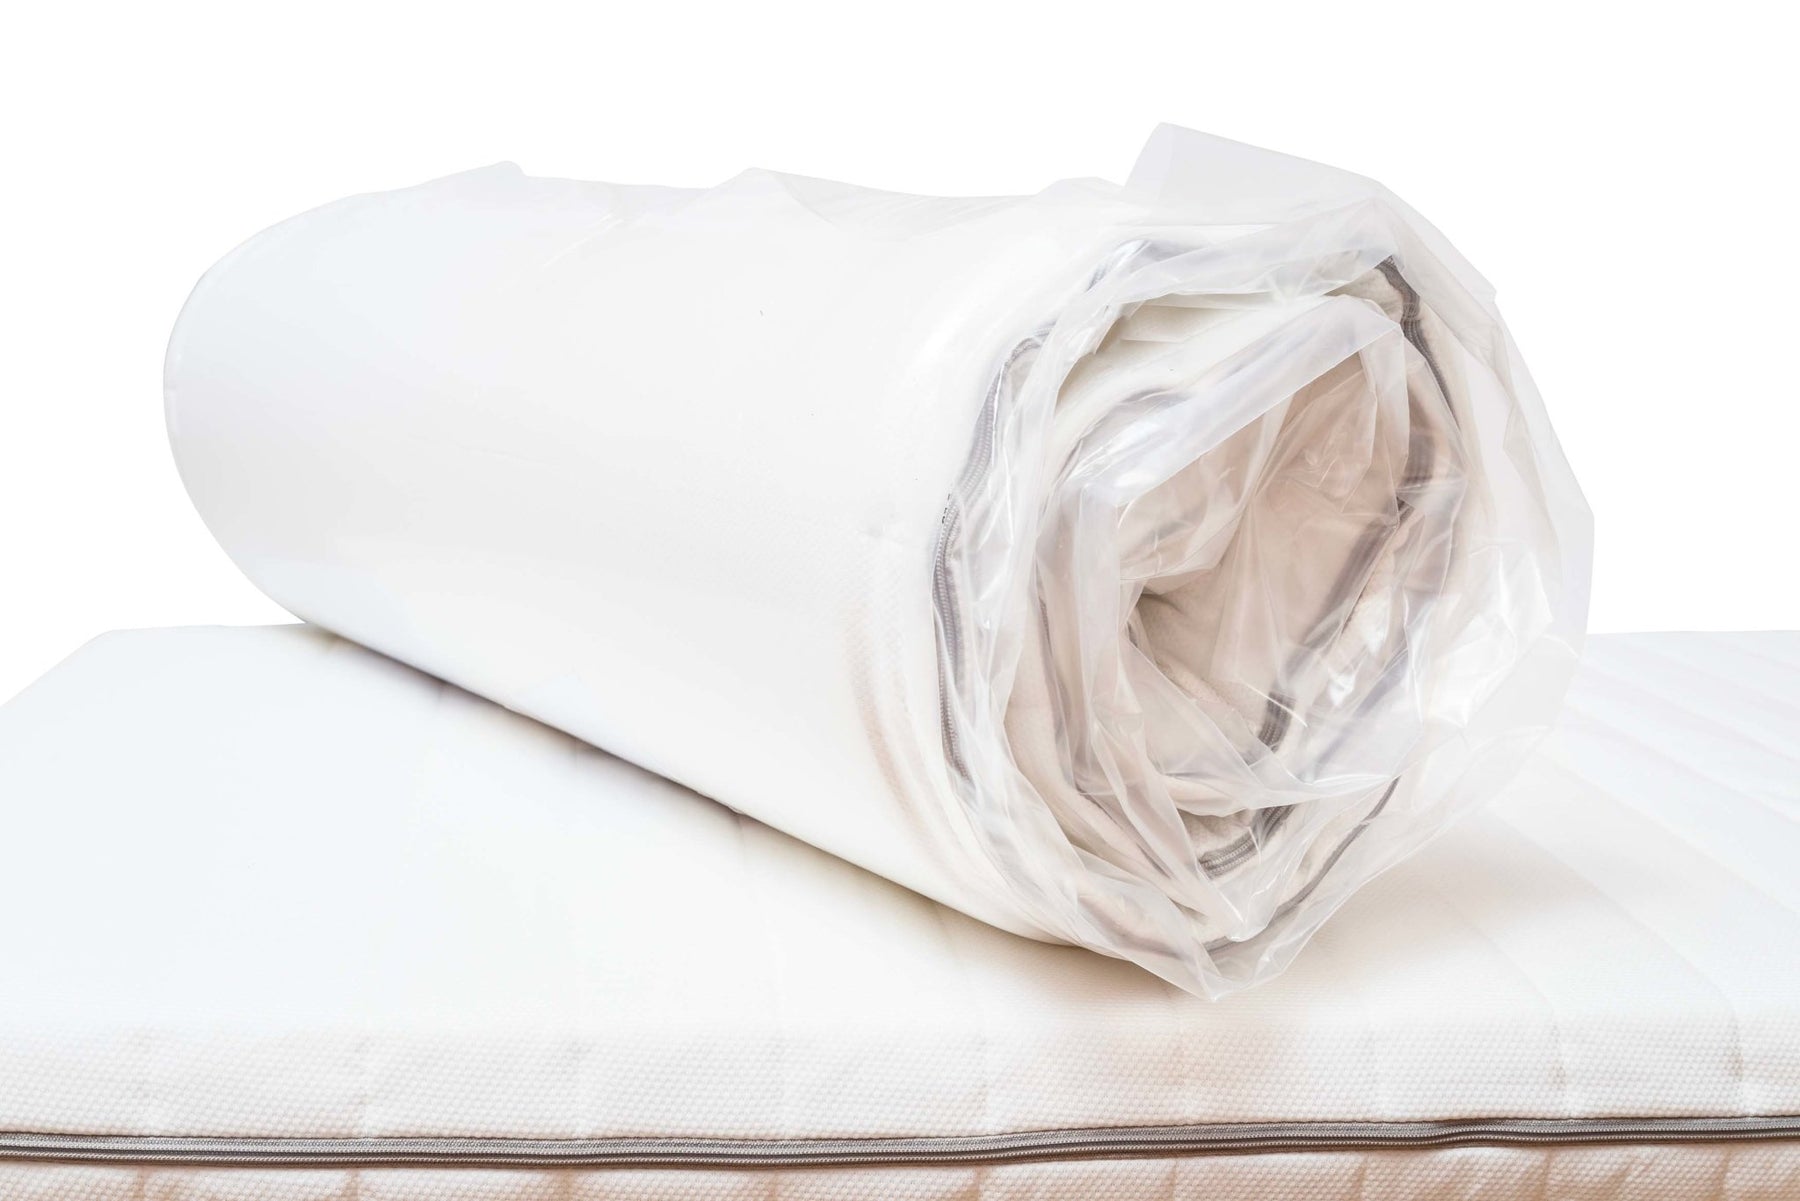 What is the Difference Between Firm and Plush Mattress?